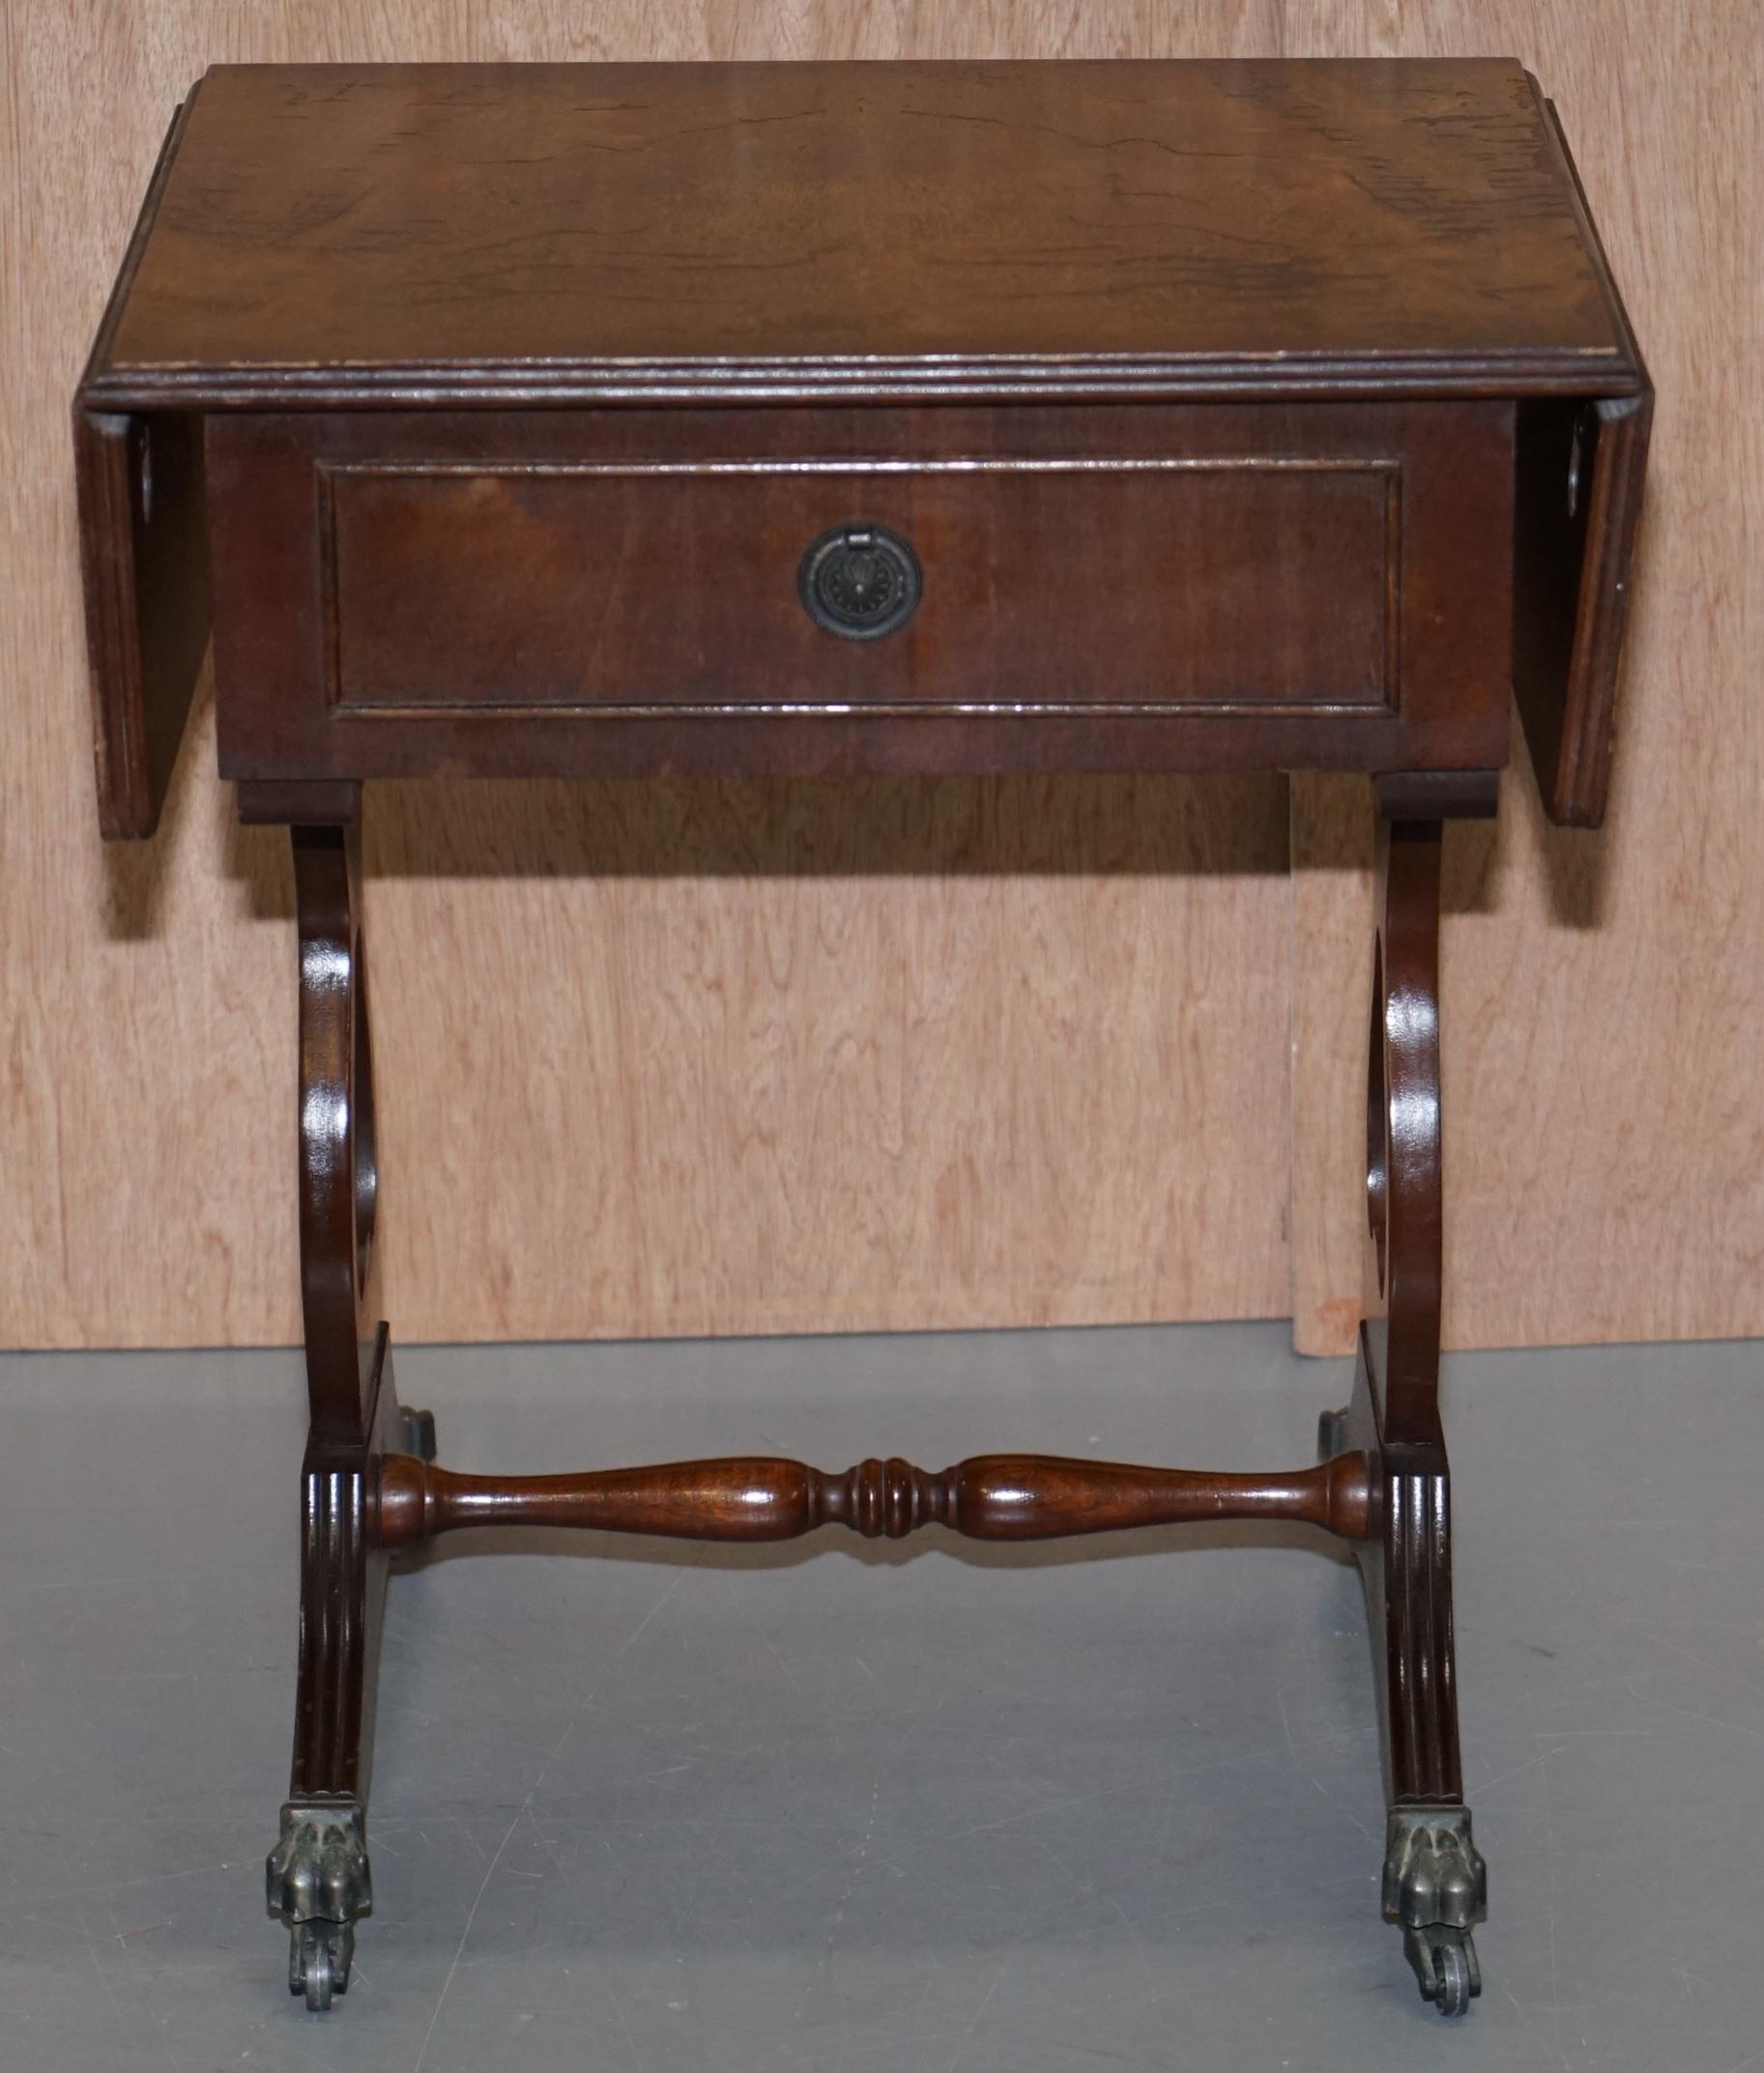 Stunning Small Crackled Hardwood Side Table with Extending Top Great Games Table 4